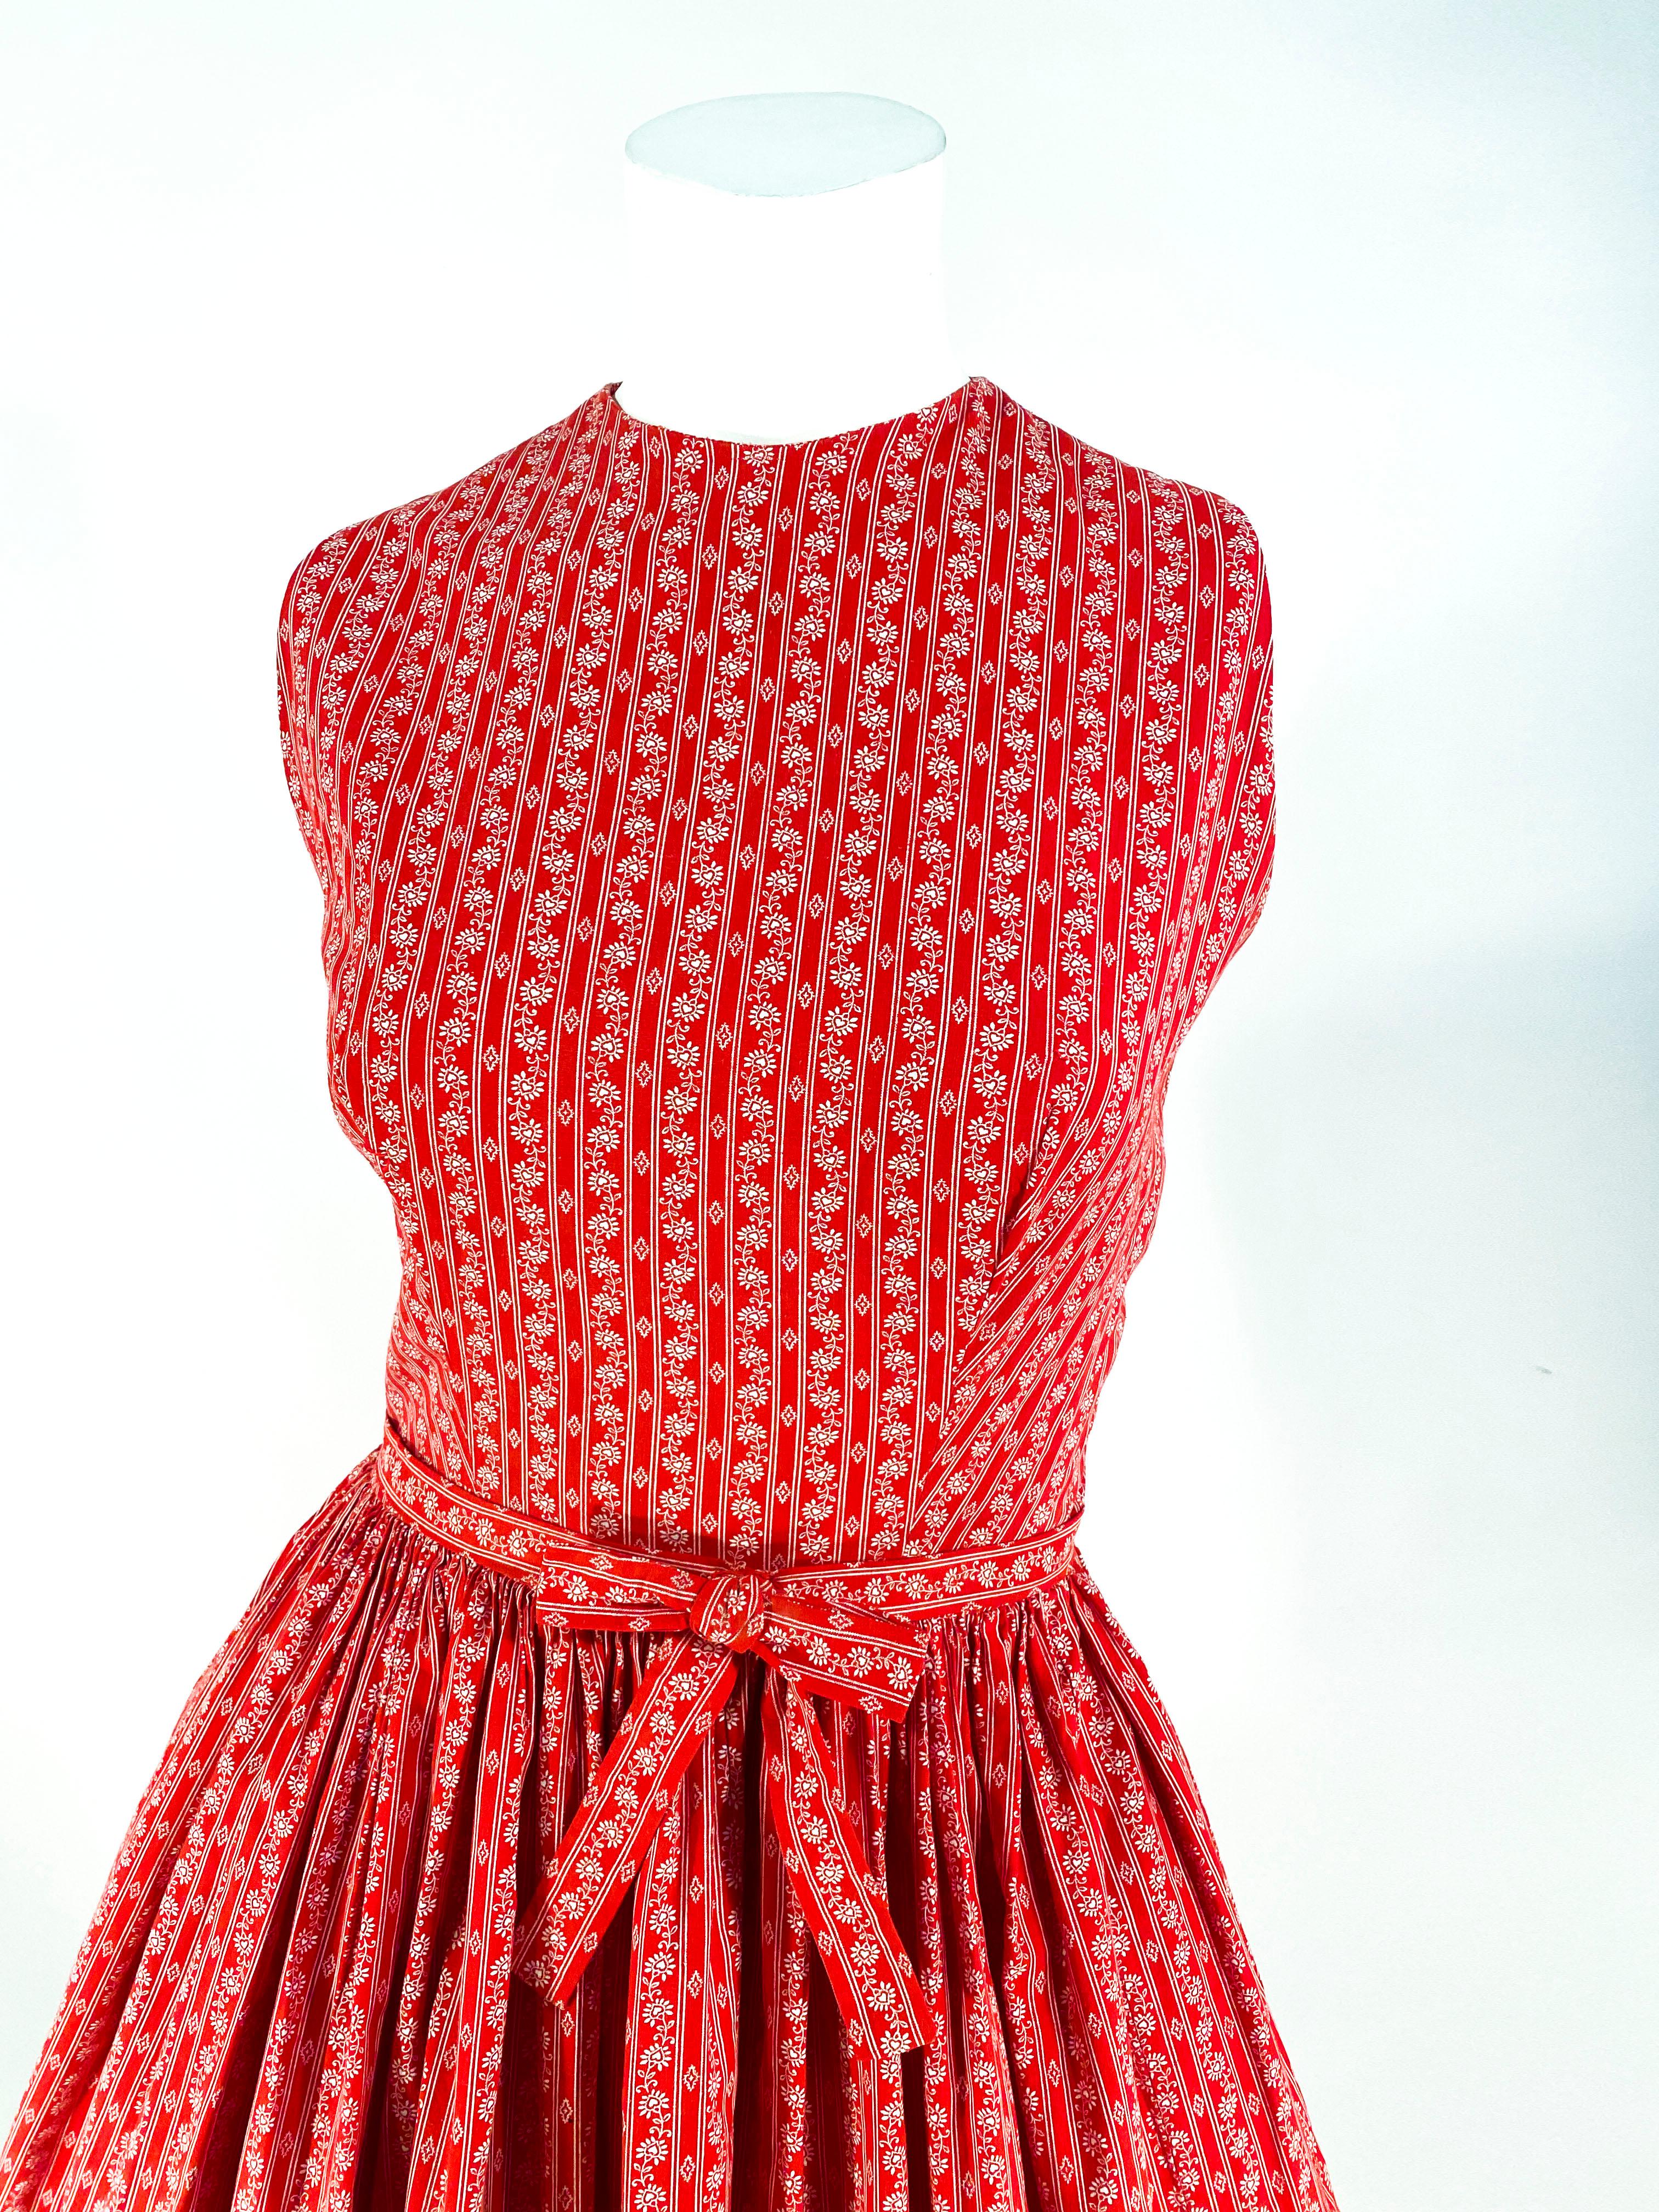 1960s Lanz red cotton dress featuring a fine calico print with heart-centered flowers, fitted sleeveless bolide, high neckline, keyhole back, seashell button closure on back of dress, and a gathered full skirt. This dress has been styled and